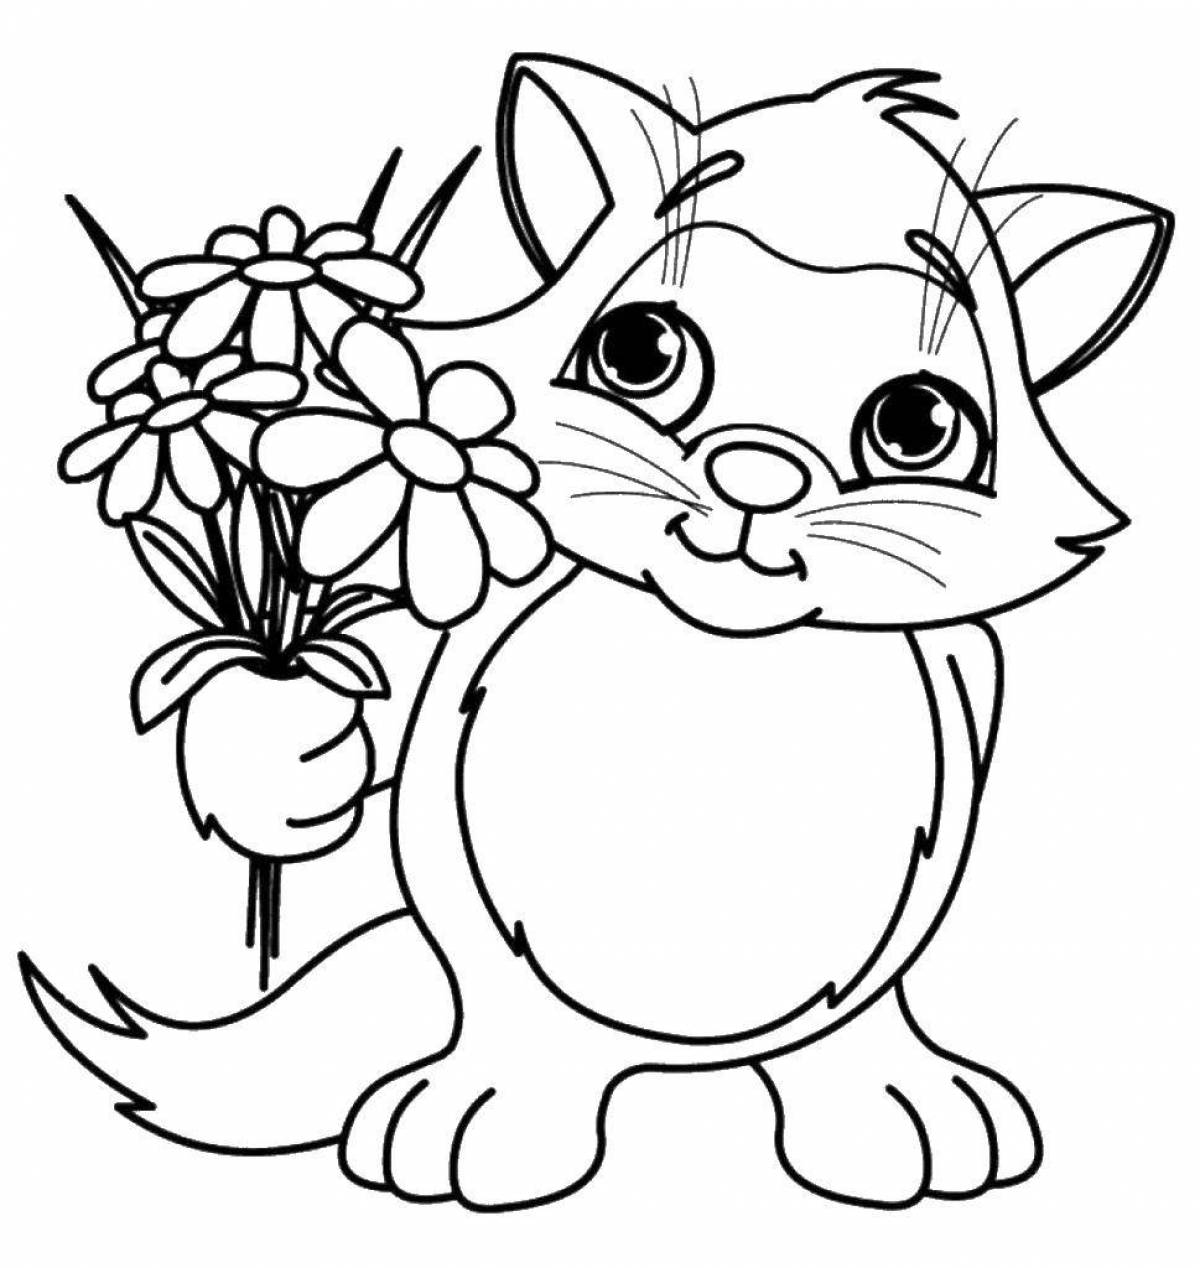 Cat with flowers #3